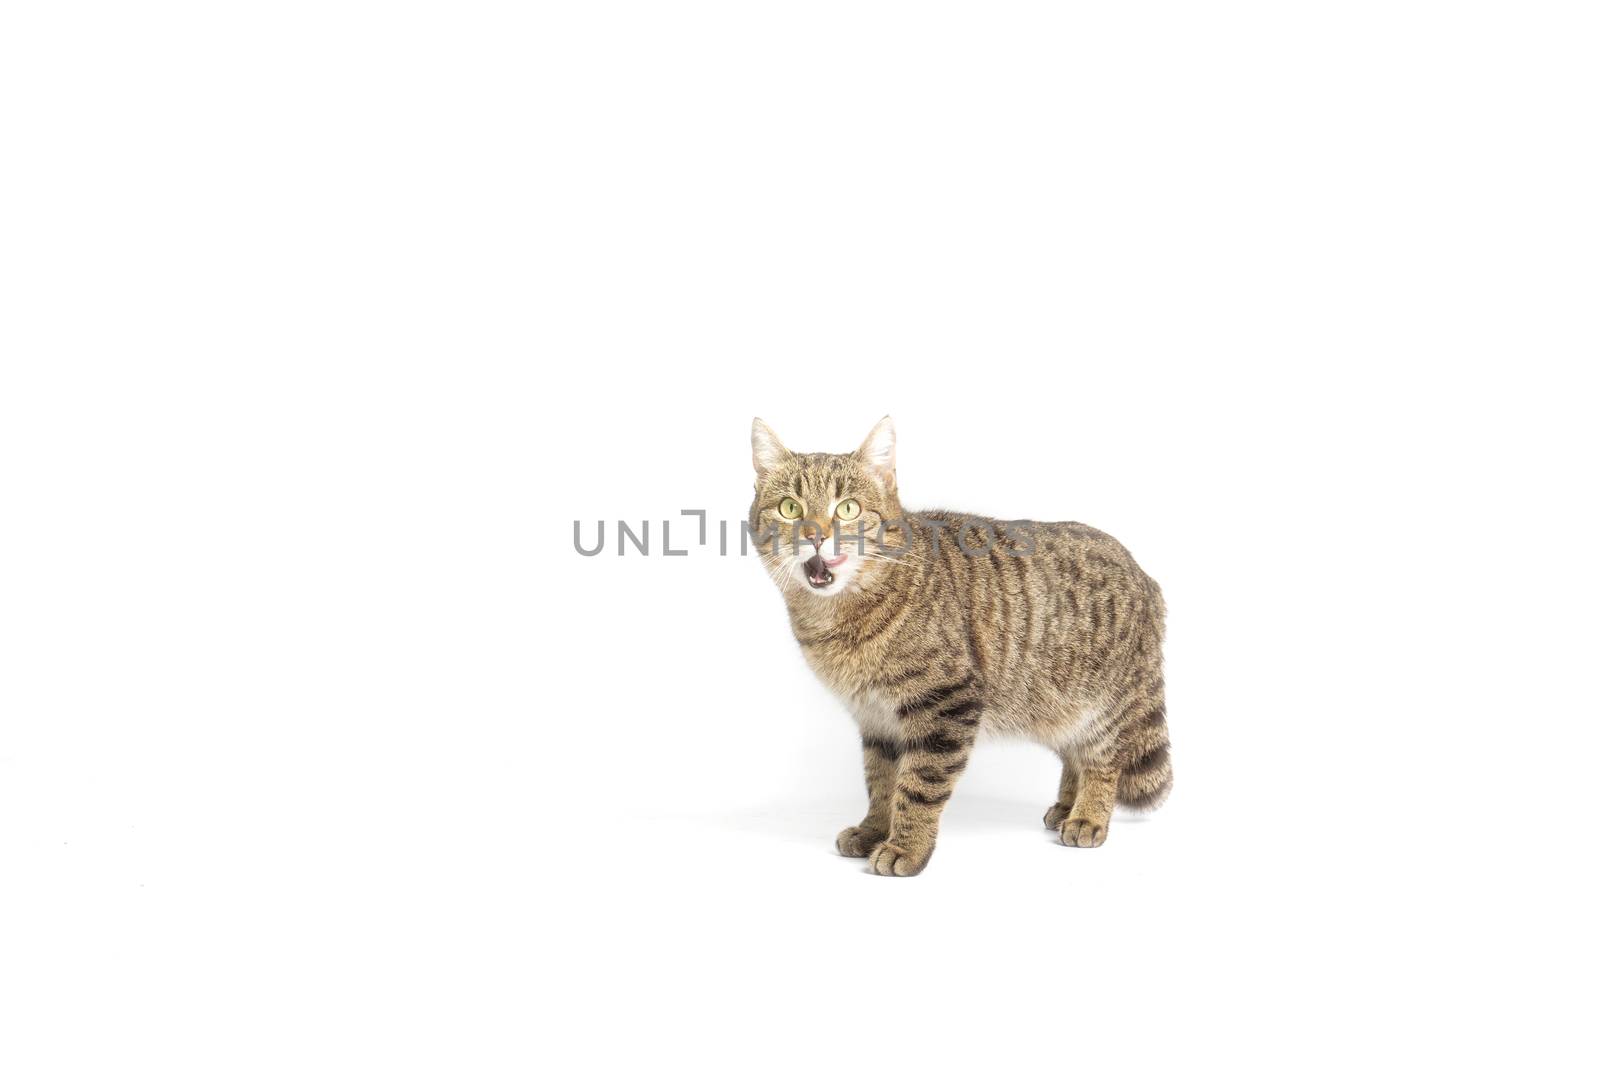 Standing cat in studio with white background by sandra_fotodesign